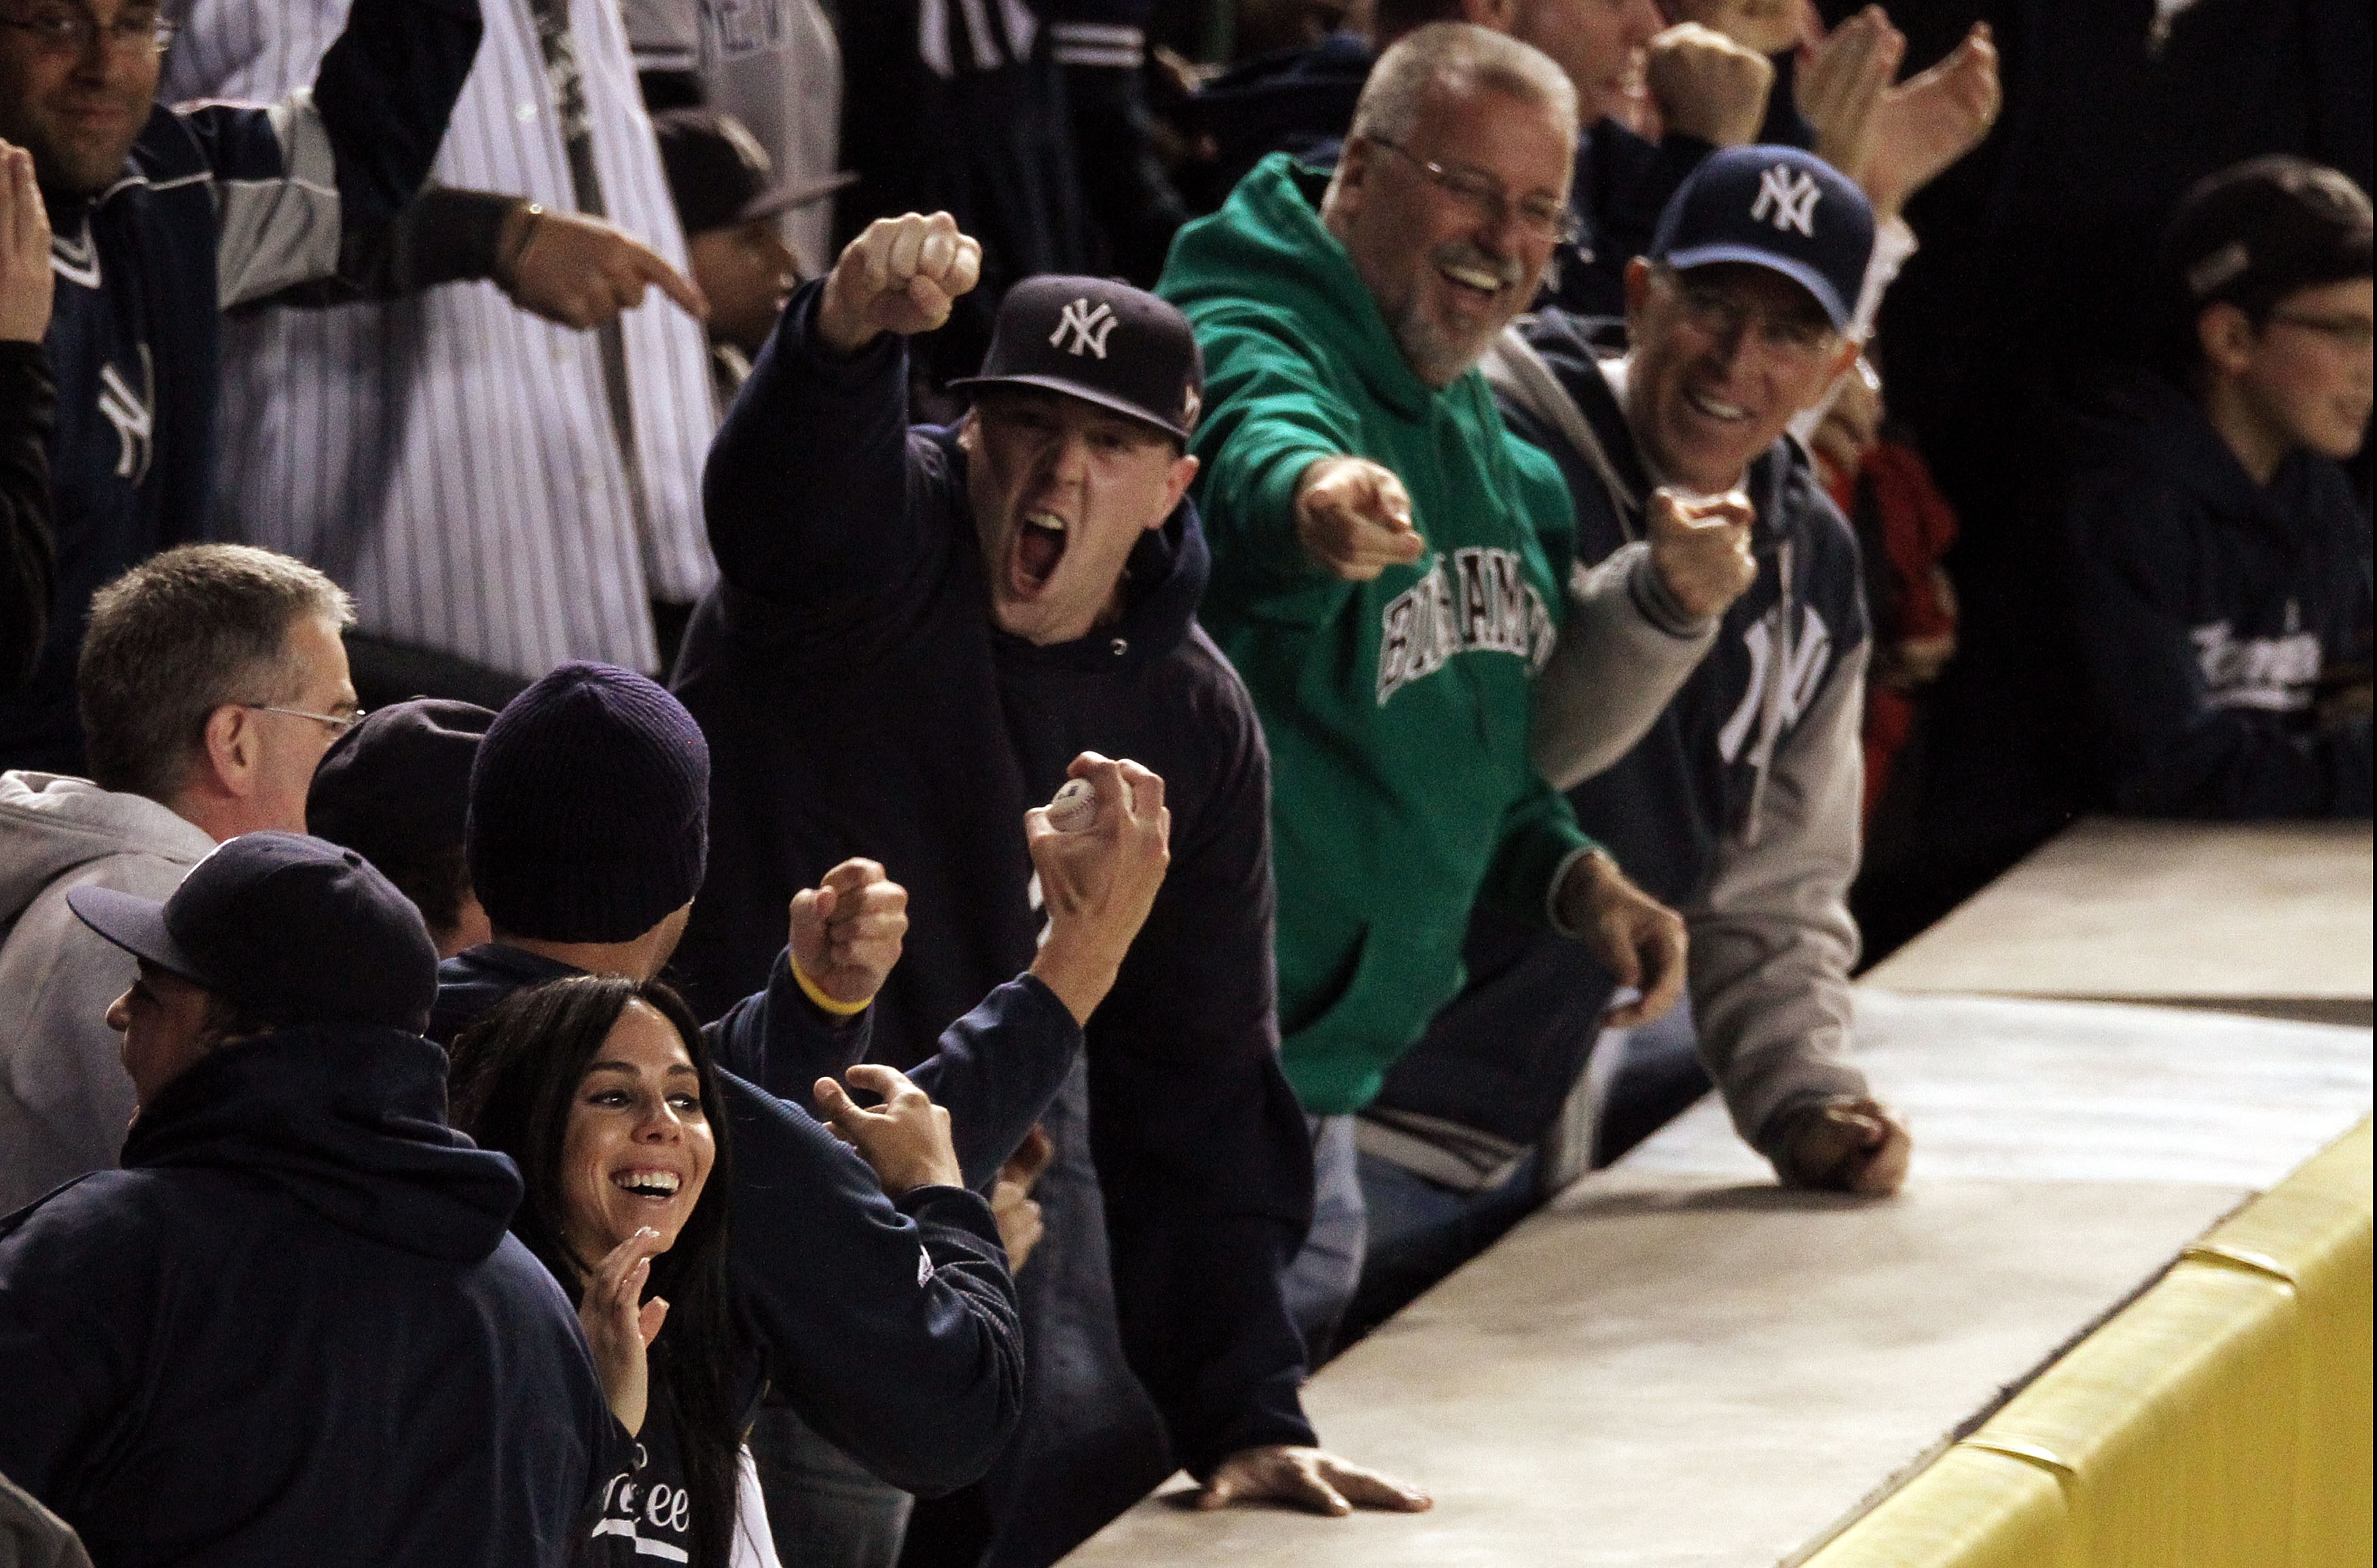 The World's most annoying Yankees fan #newyorkyankees